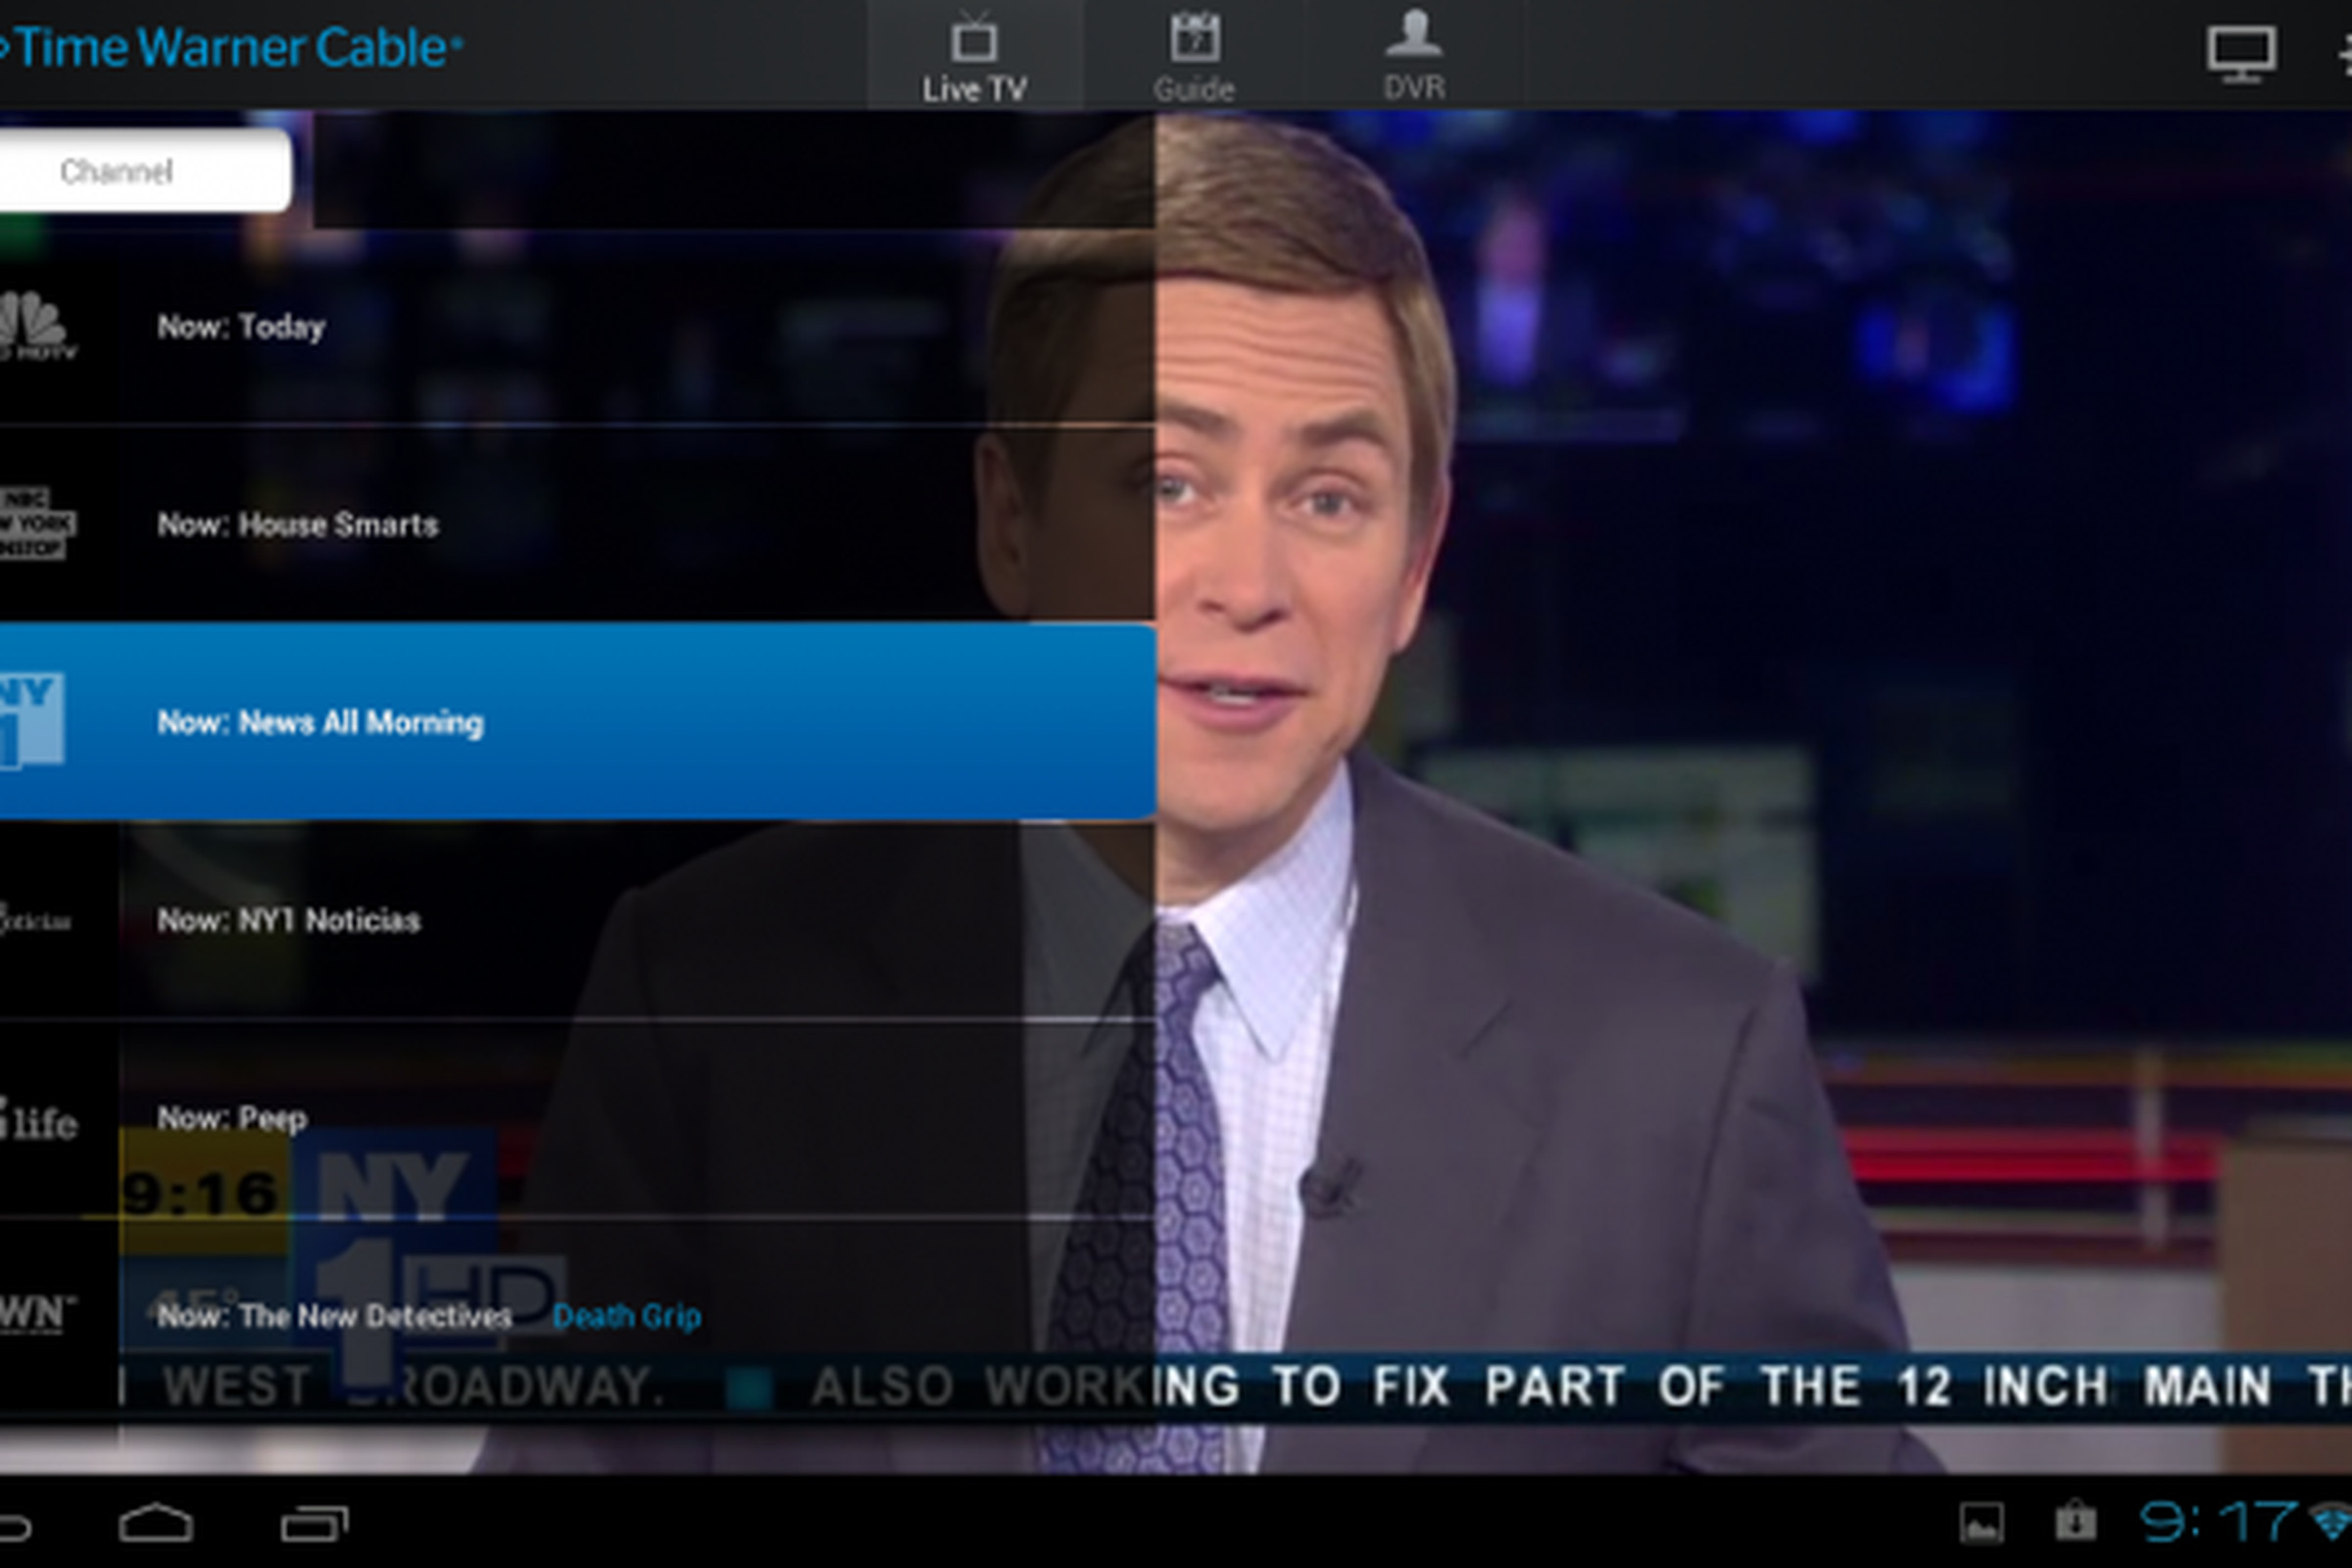 TWC android streaming app